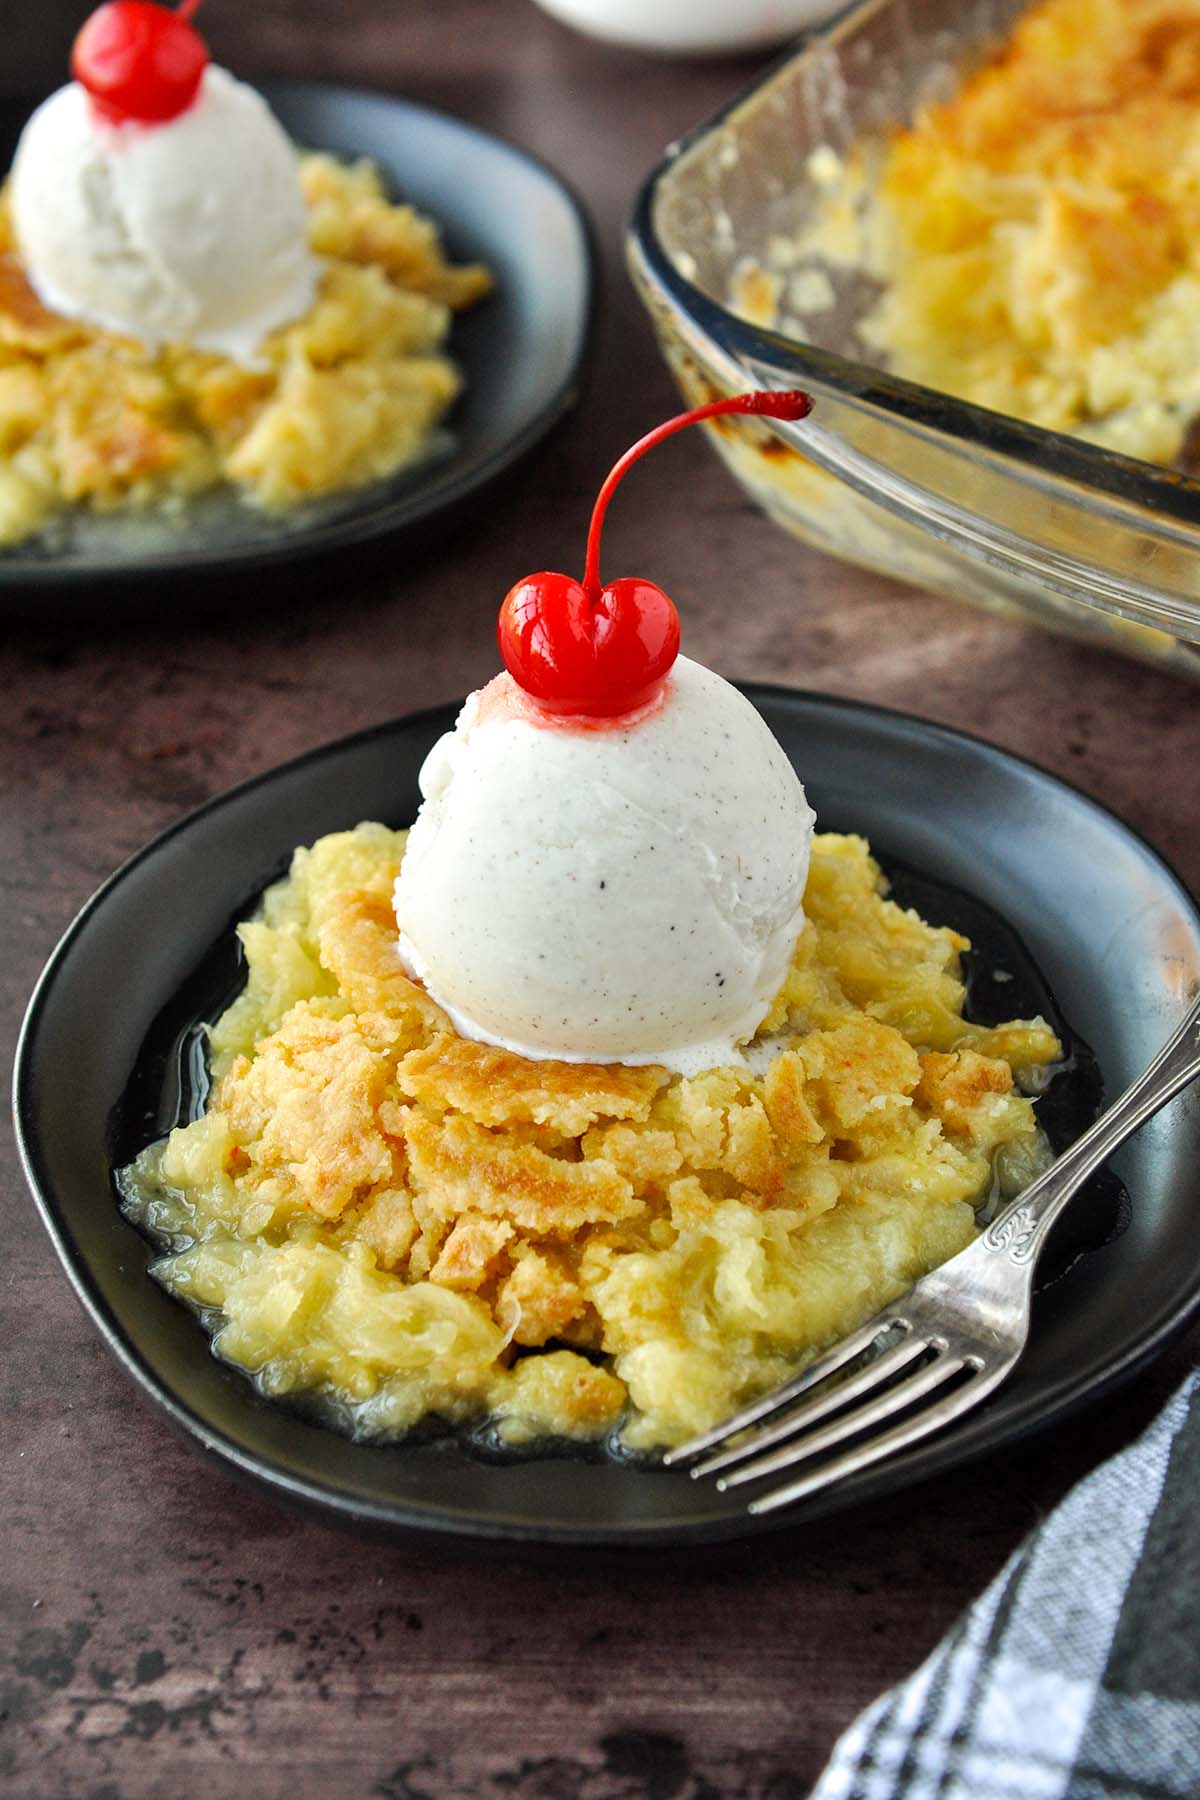 A plate of juicy pineapple dump cake topped with ice cream and a cherry.